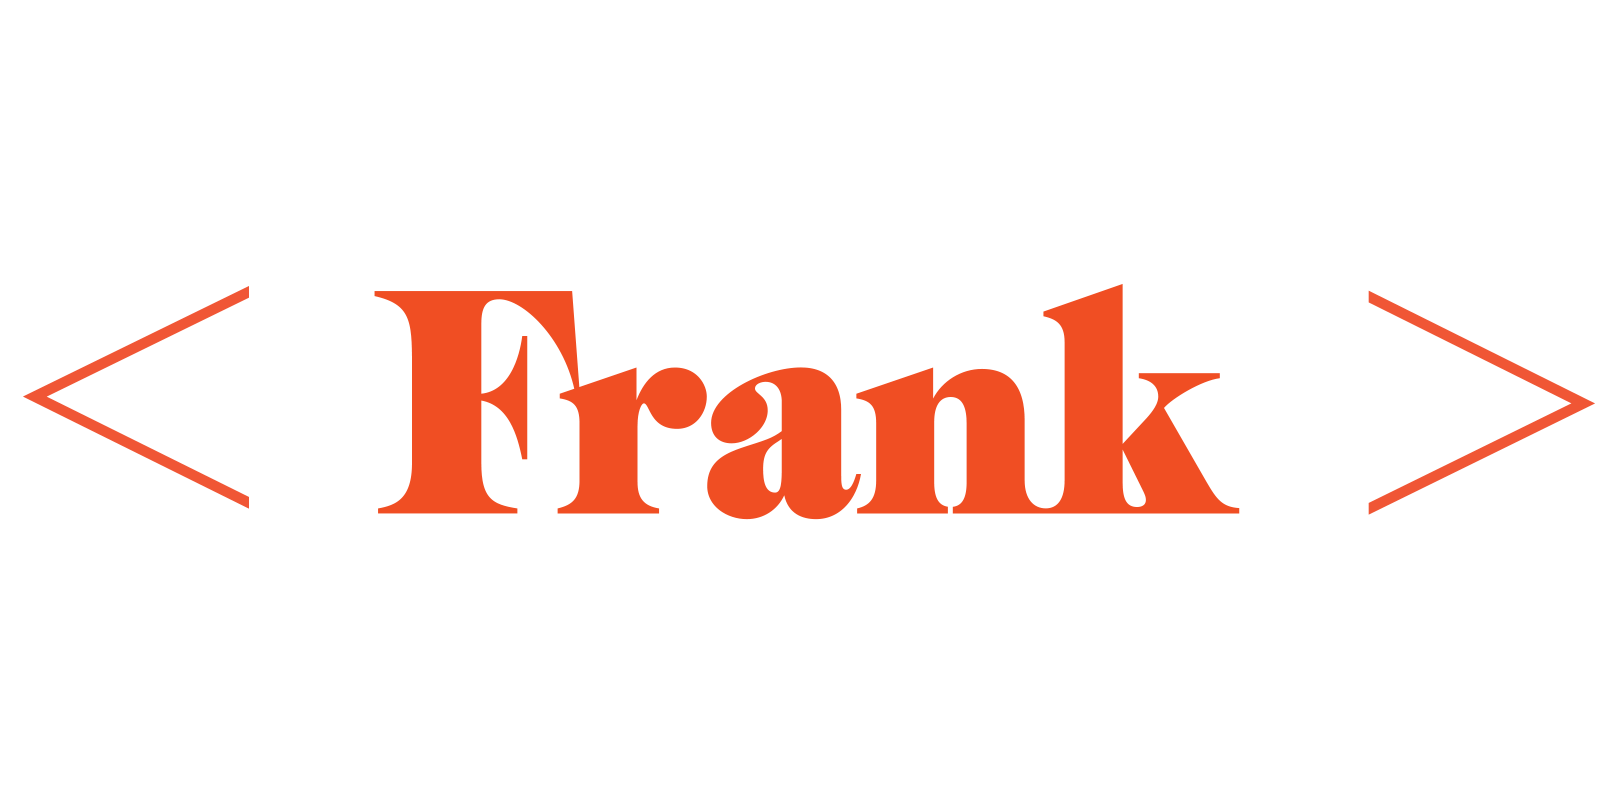 About – Hey Frank